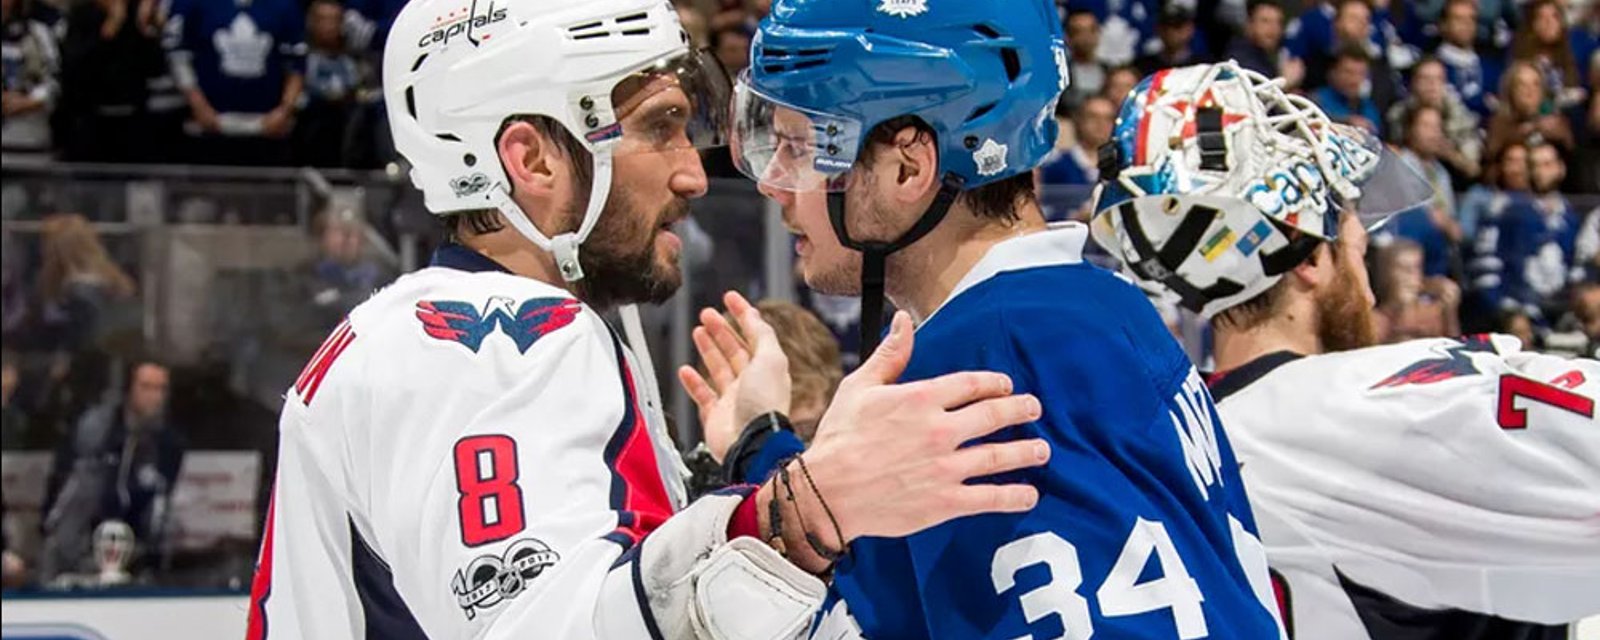 Ovechkin offers advice to Matthews, then makes a joke about his former head coach Dale Hunter